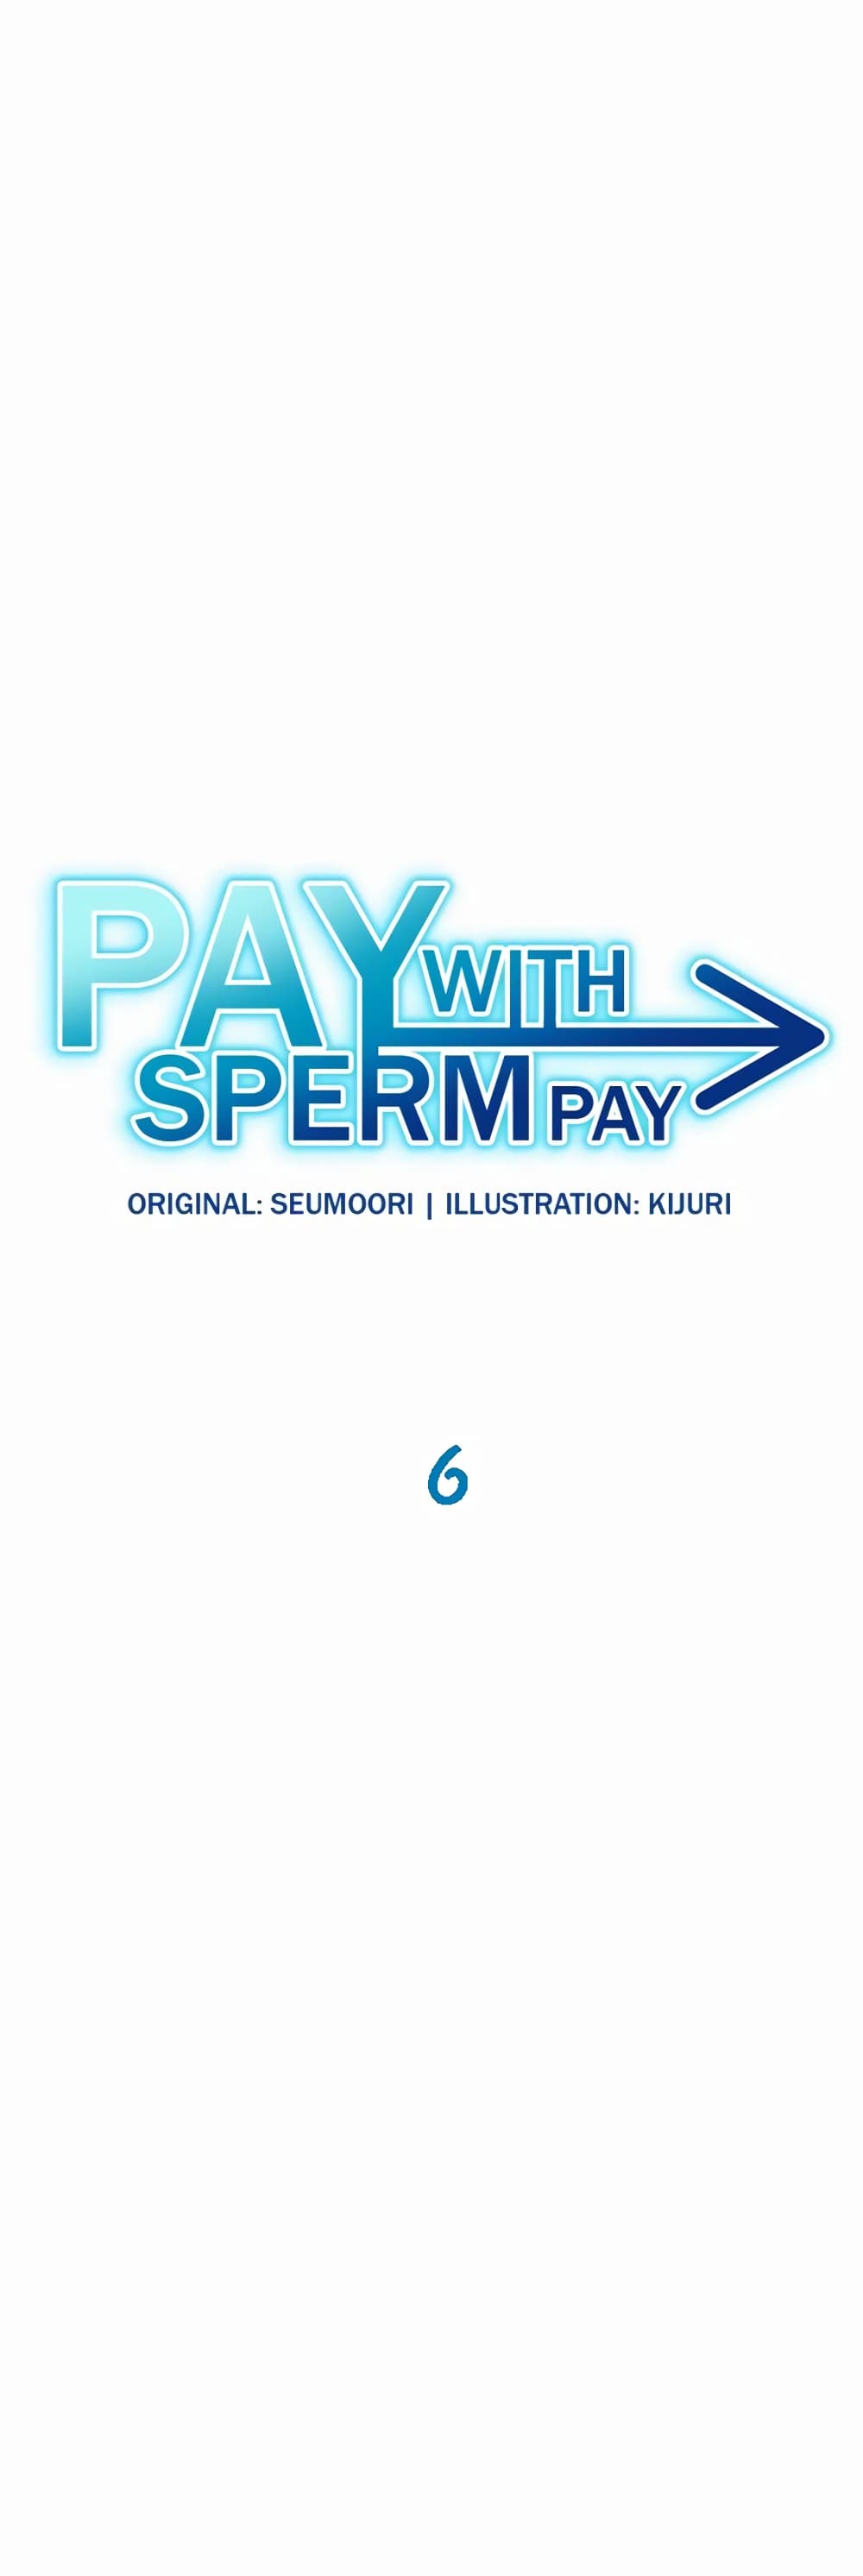 Pay with Sperm Pay 6-6